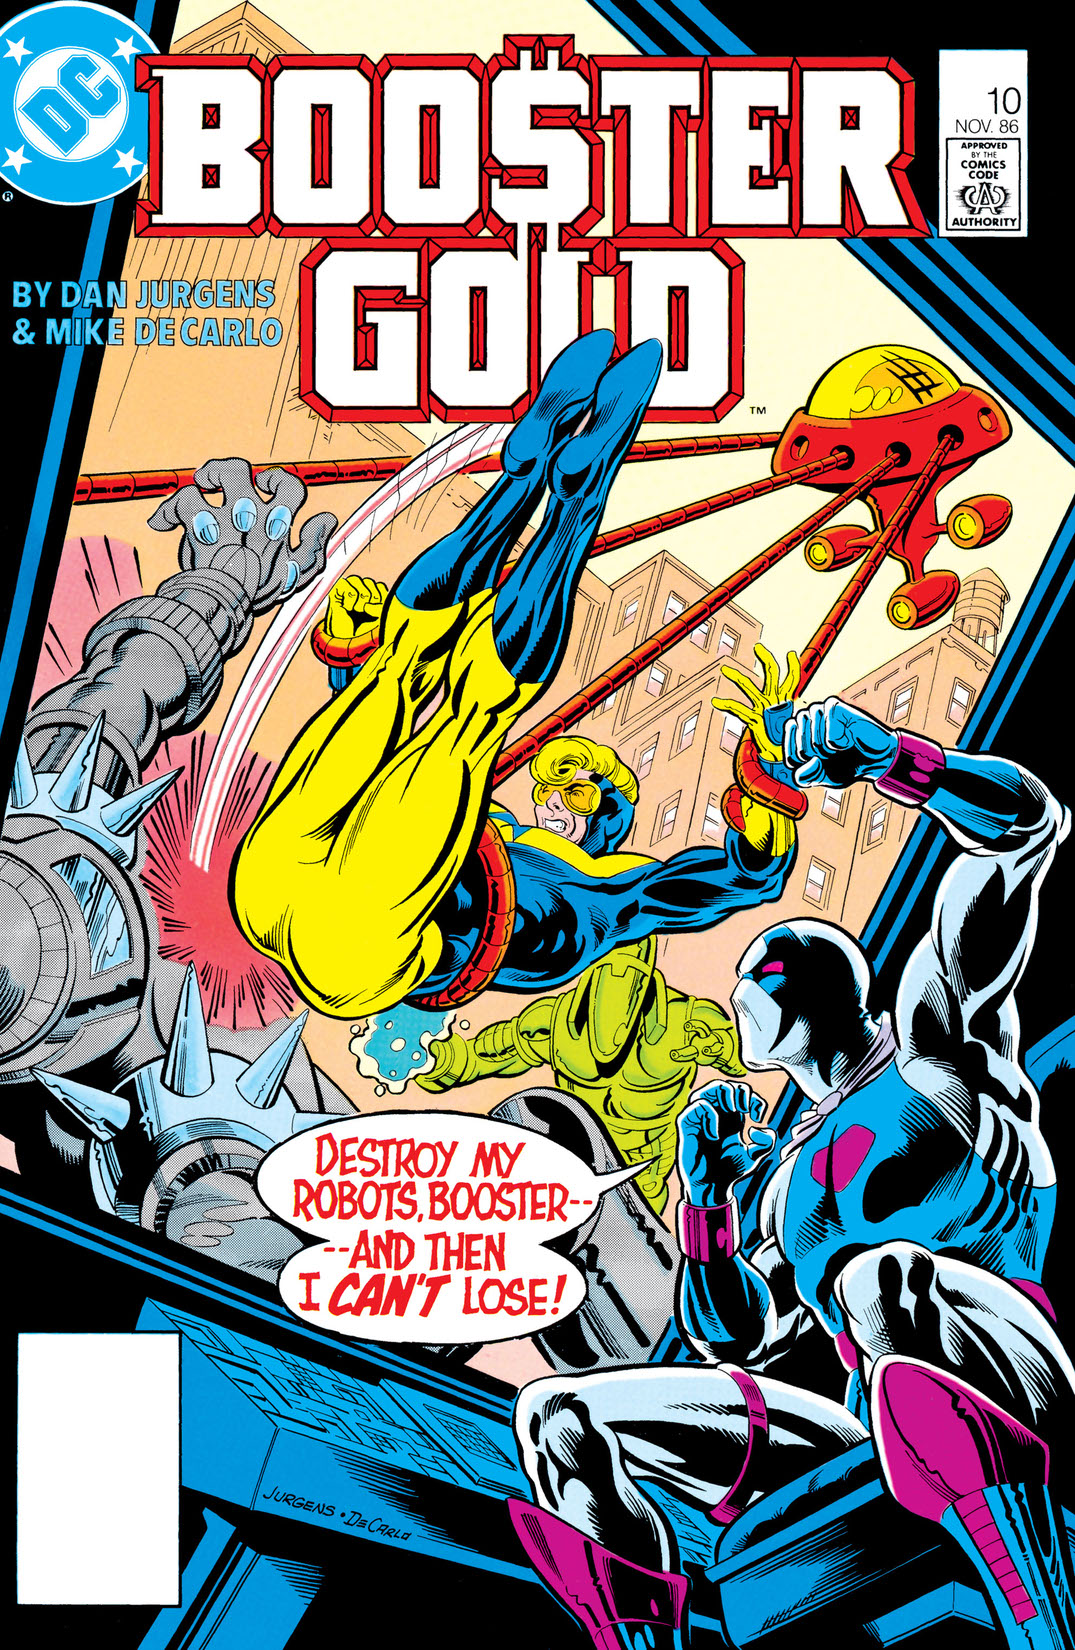 Booster Gold (1985-) #10 preview images